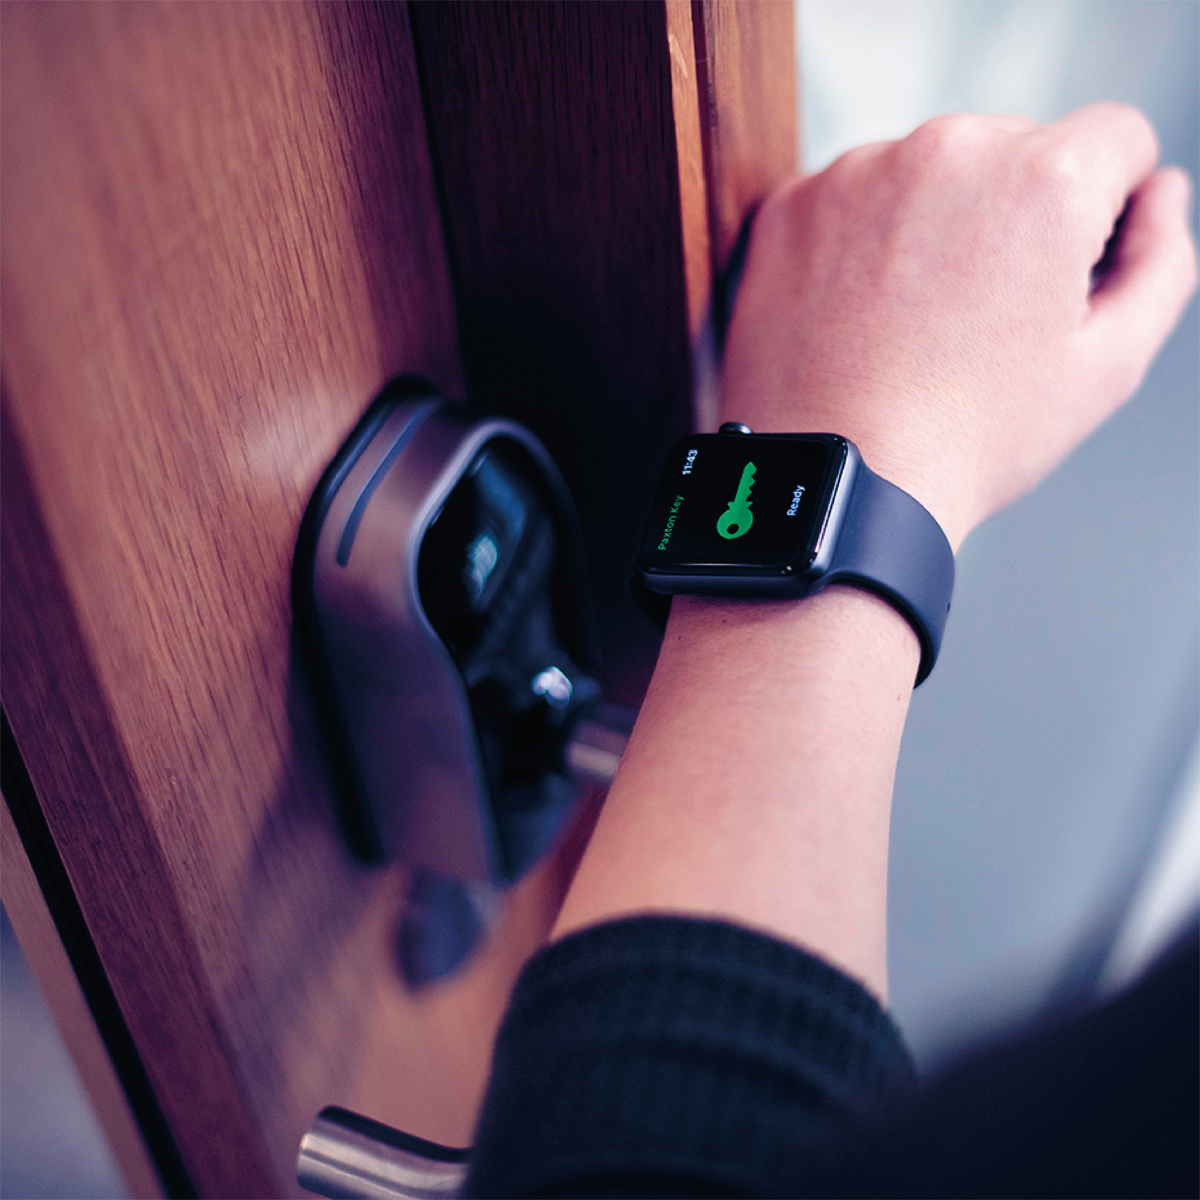 Access control with smart watch